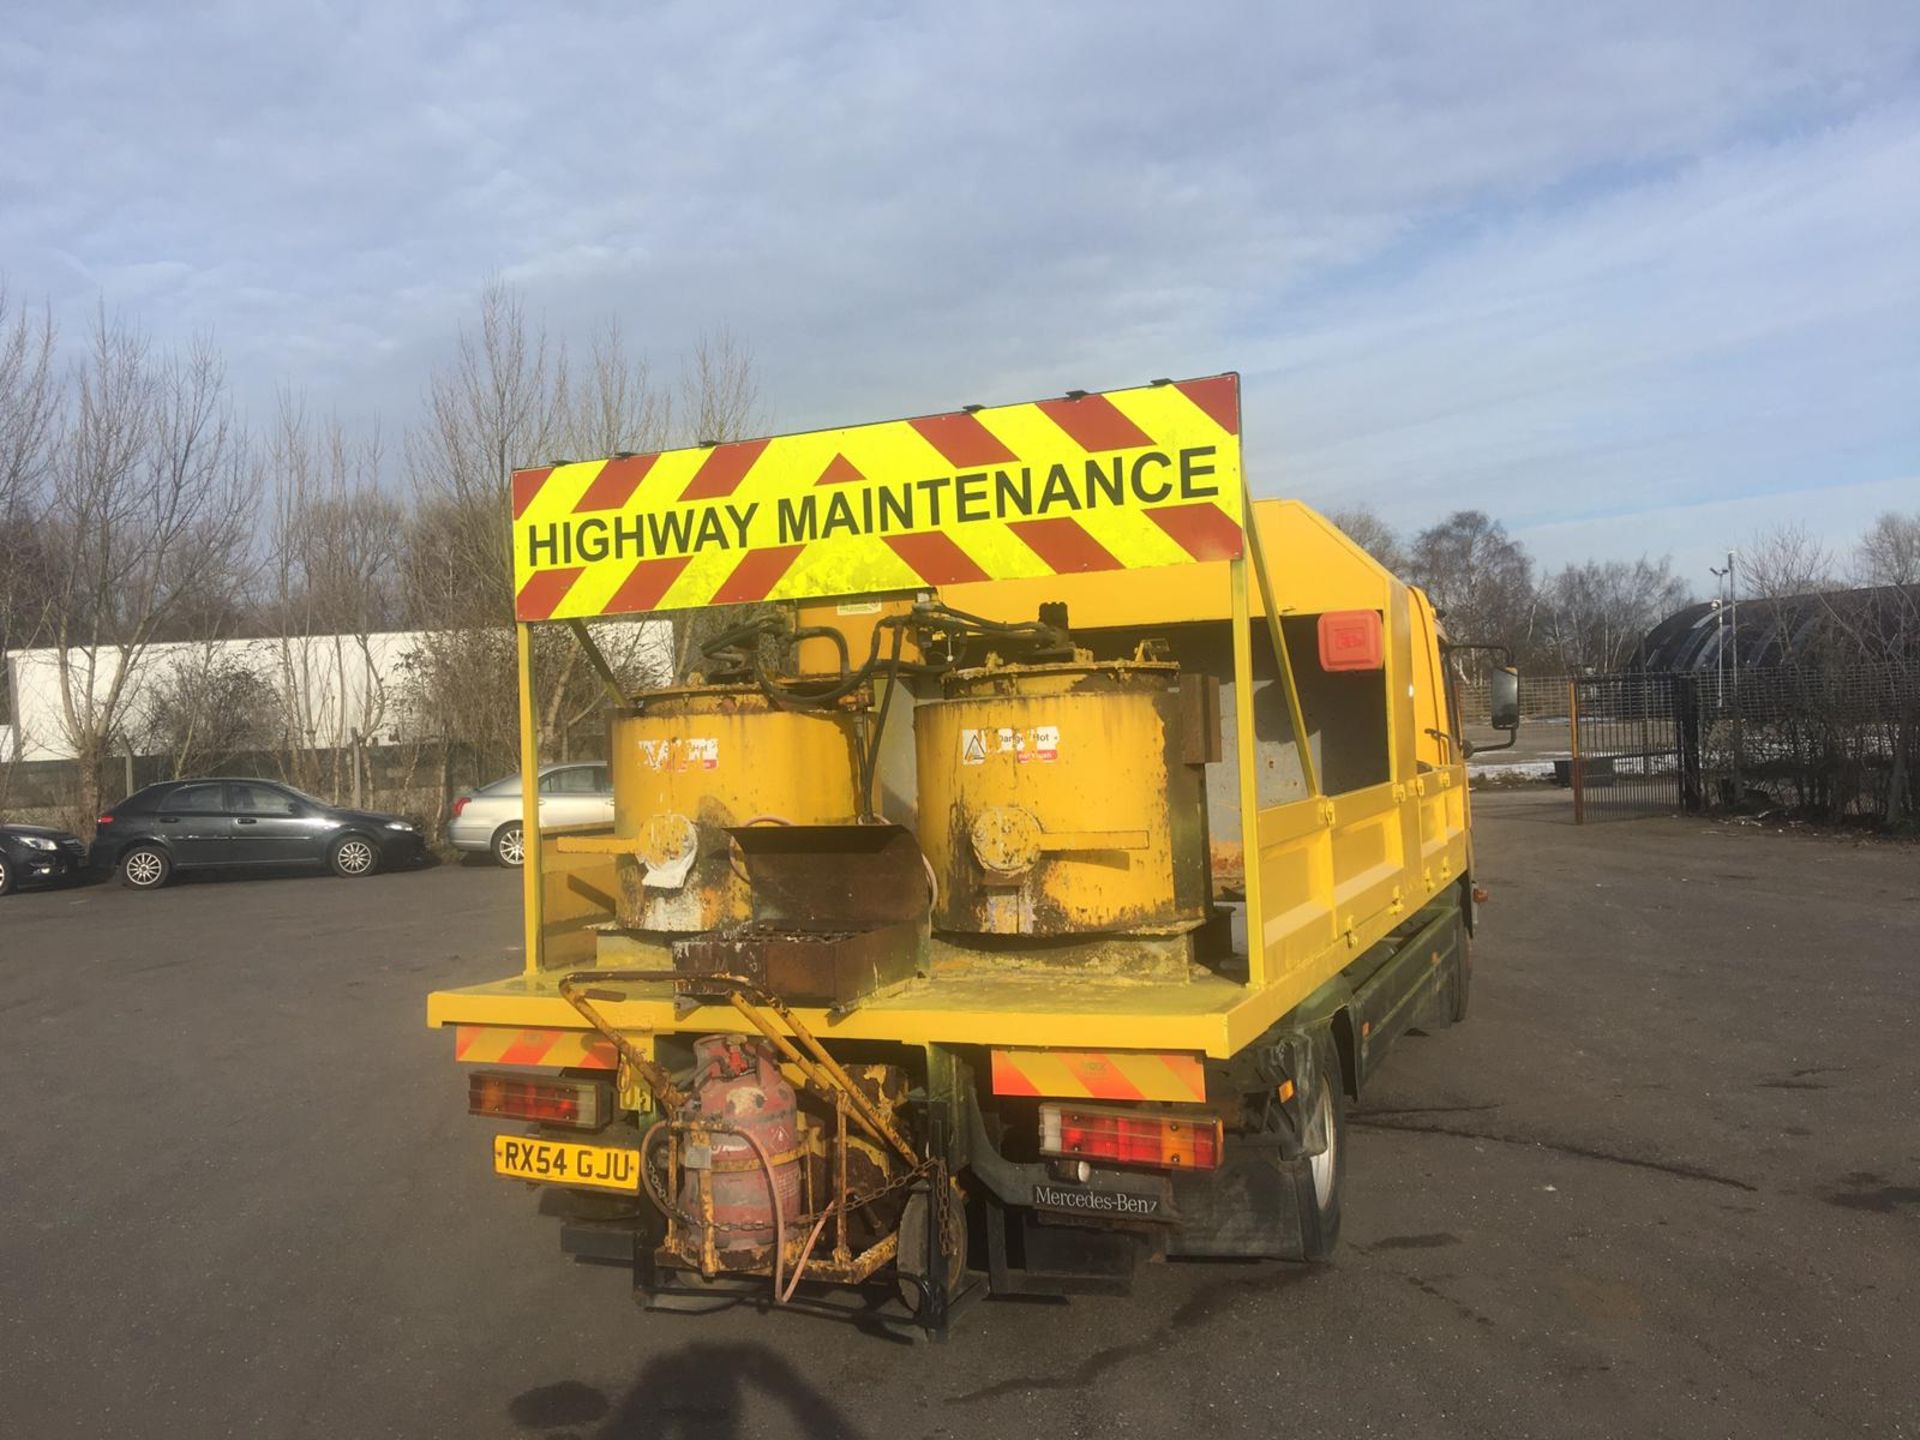 2004/54 REG MERCEDES ATEGO 1018 DAY YELLOW DROPSIDE LINE PAINTING LORRY 4.3L DIESEL ENGINE *NO VAT* - Image 8 of 64